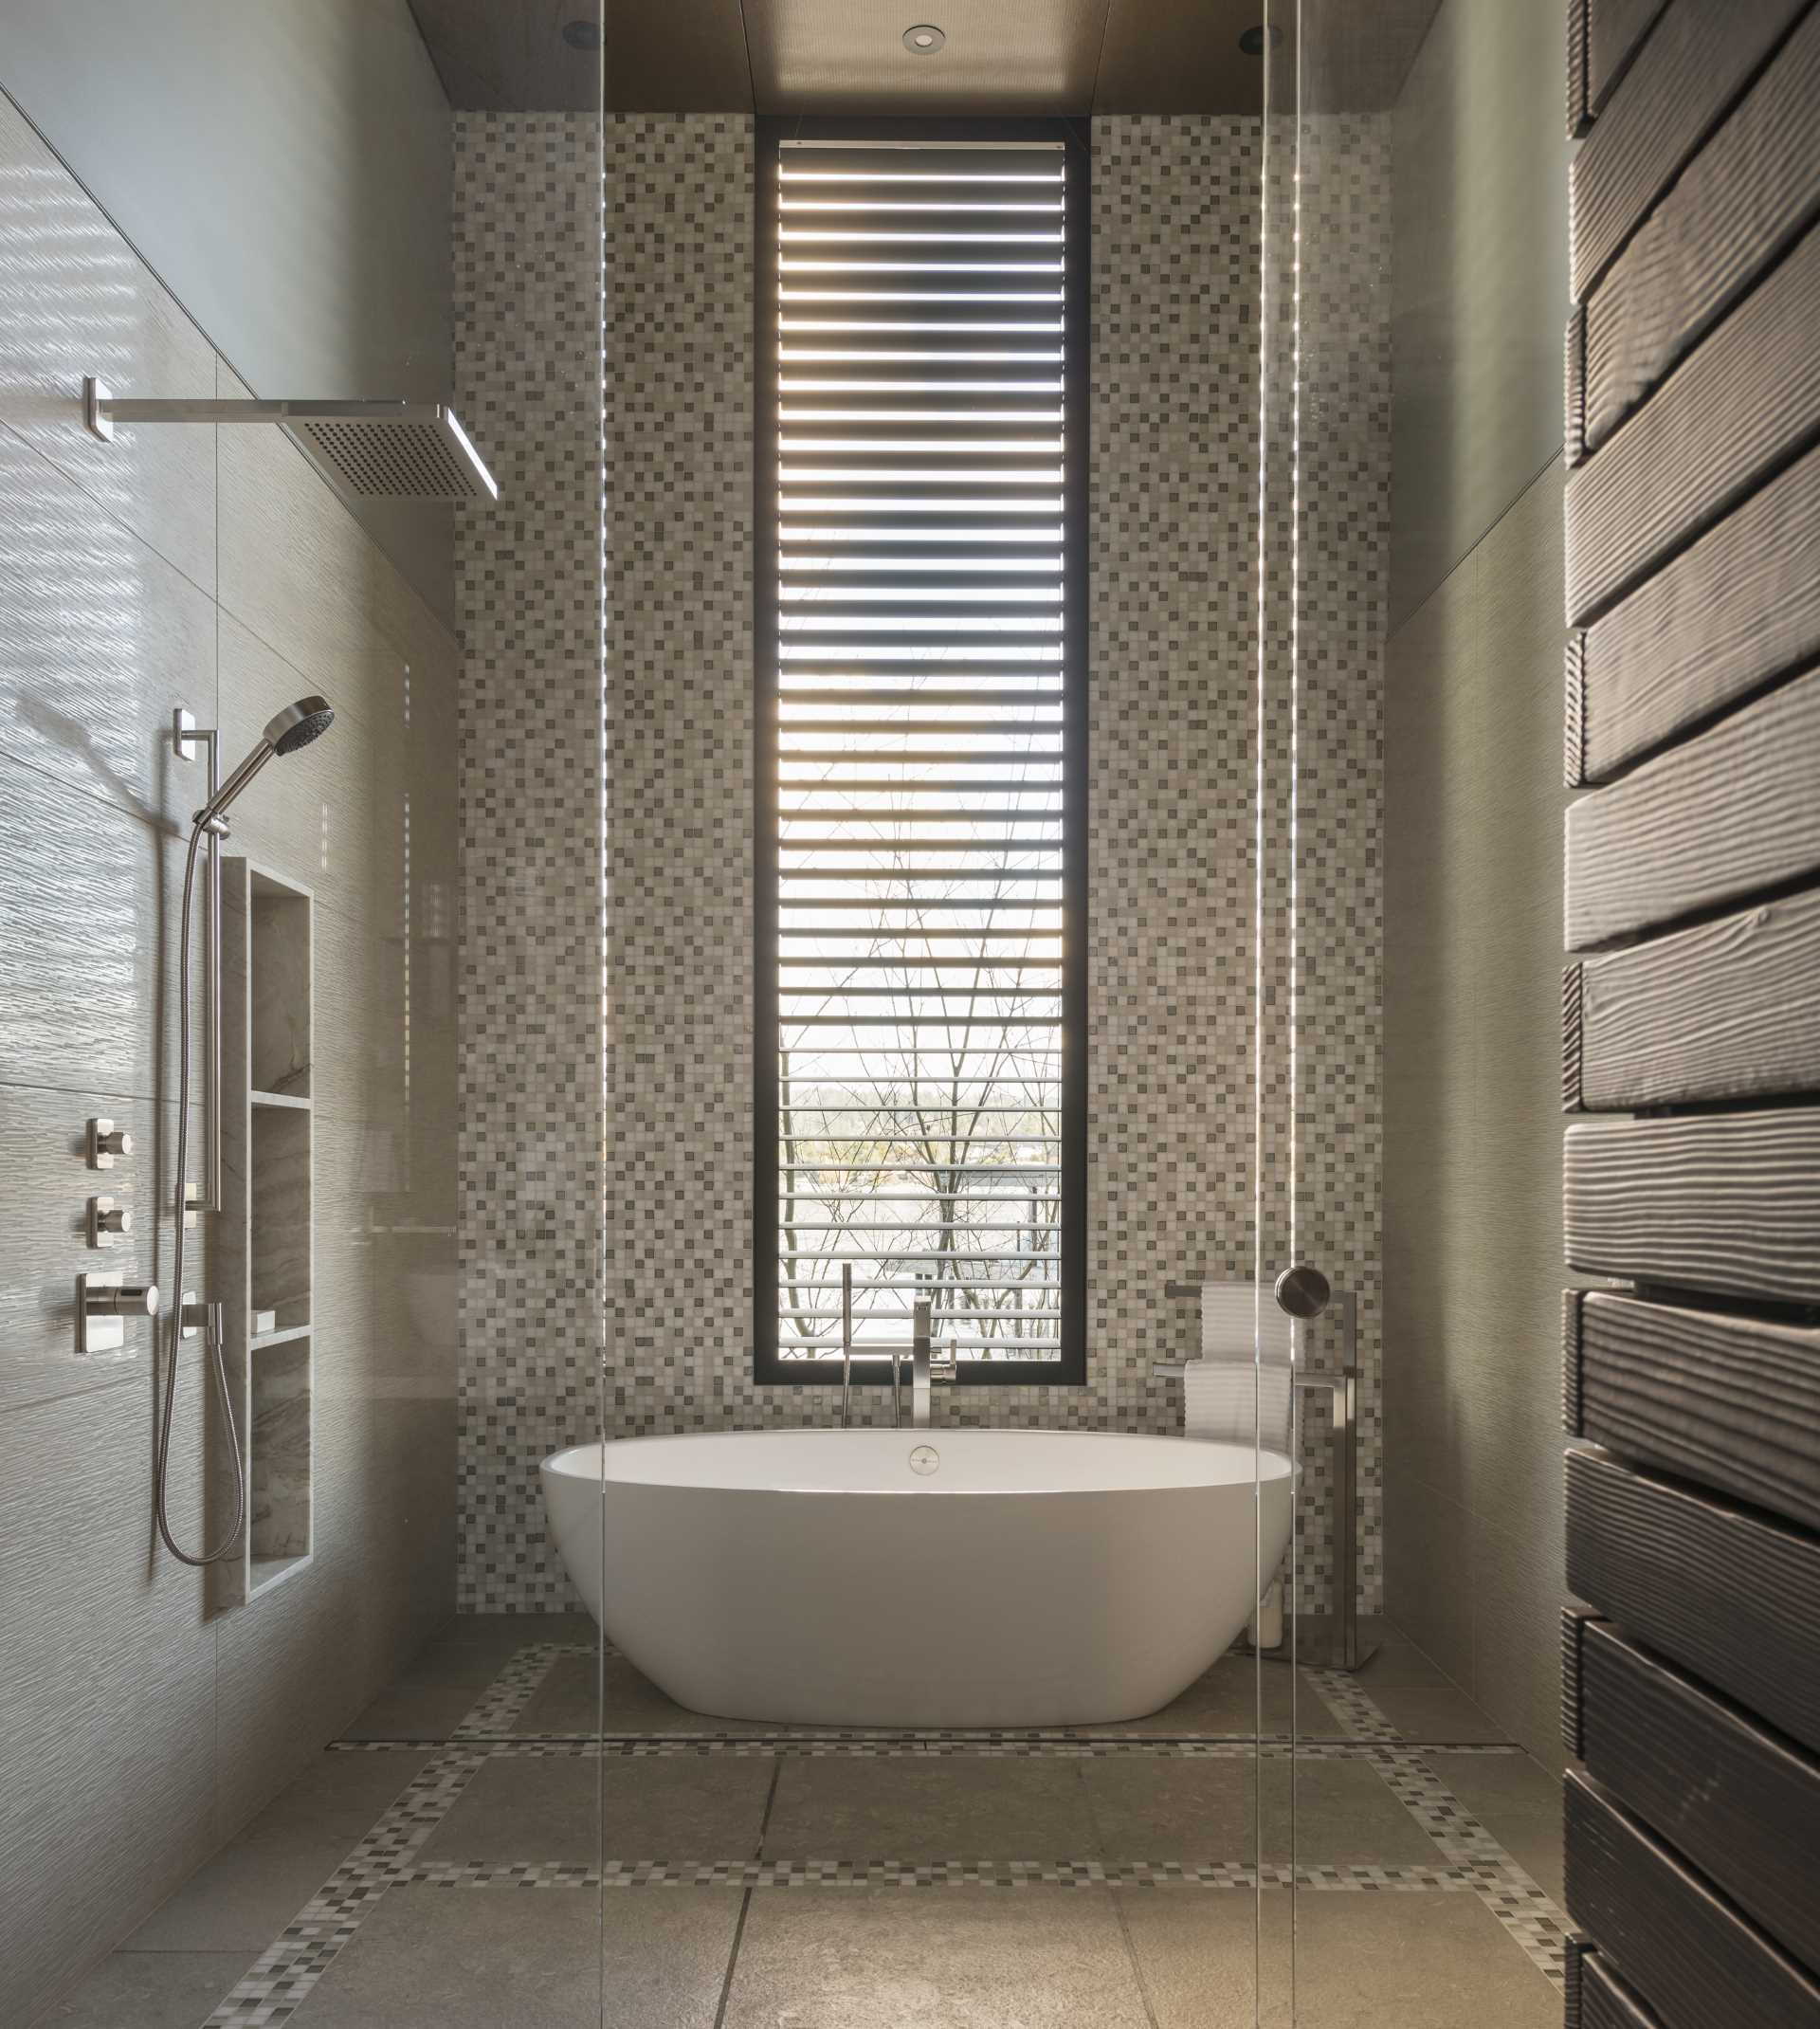 A modern bathroom with a high ceiling, a freestanding bathtub, and a wall of tiles.